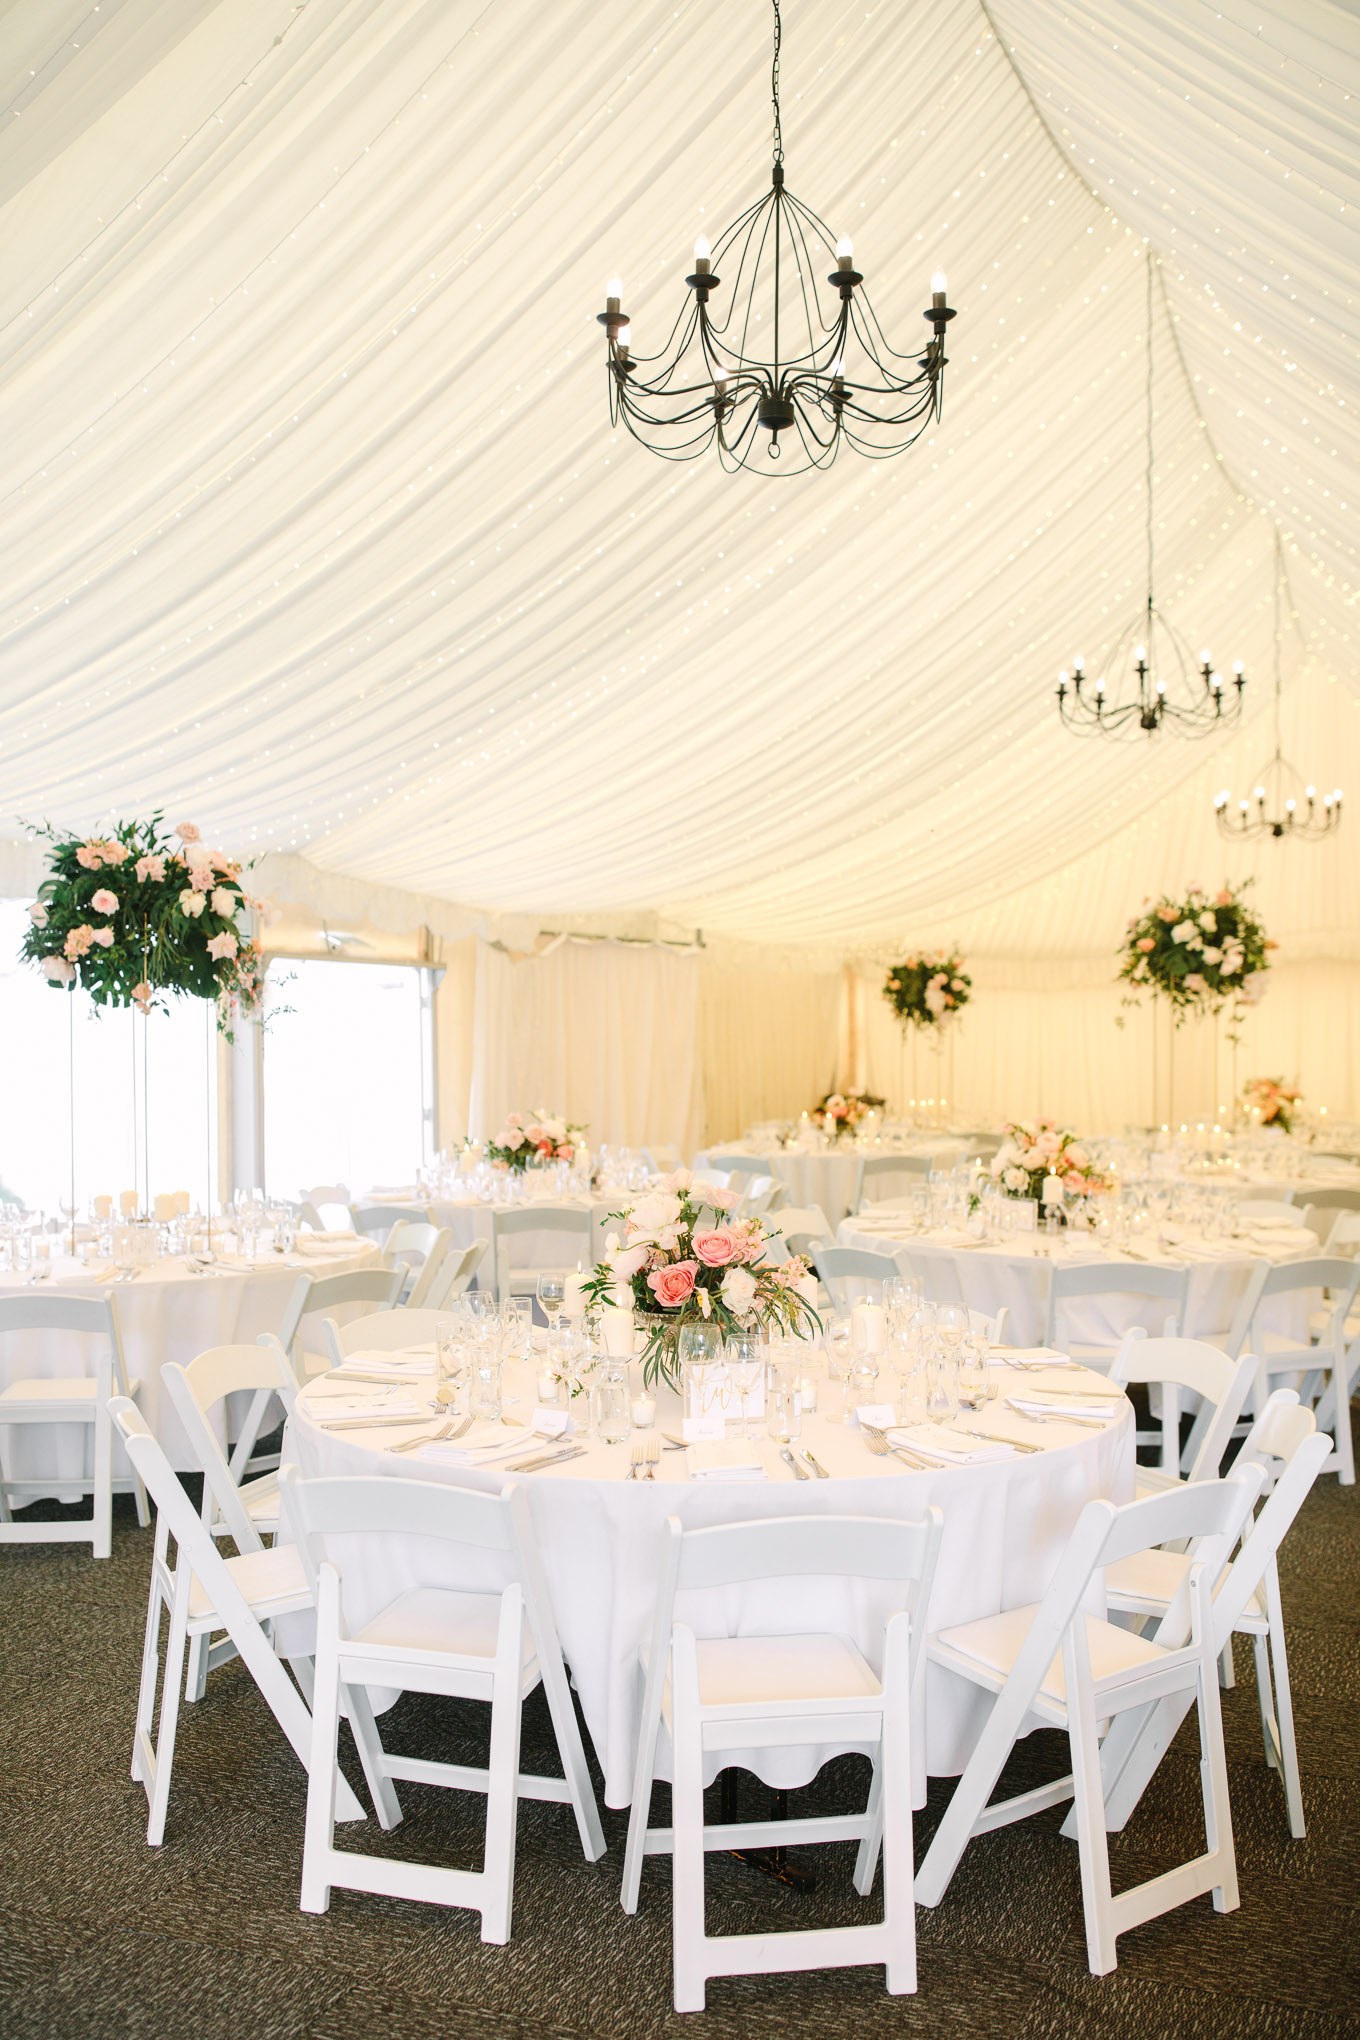 Tented ceremony at Millbrook Resort Queenstown New Zealand wedding by Mary Costa Photography | www.marycostaweddings.com